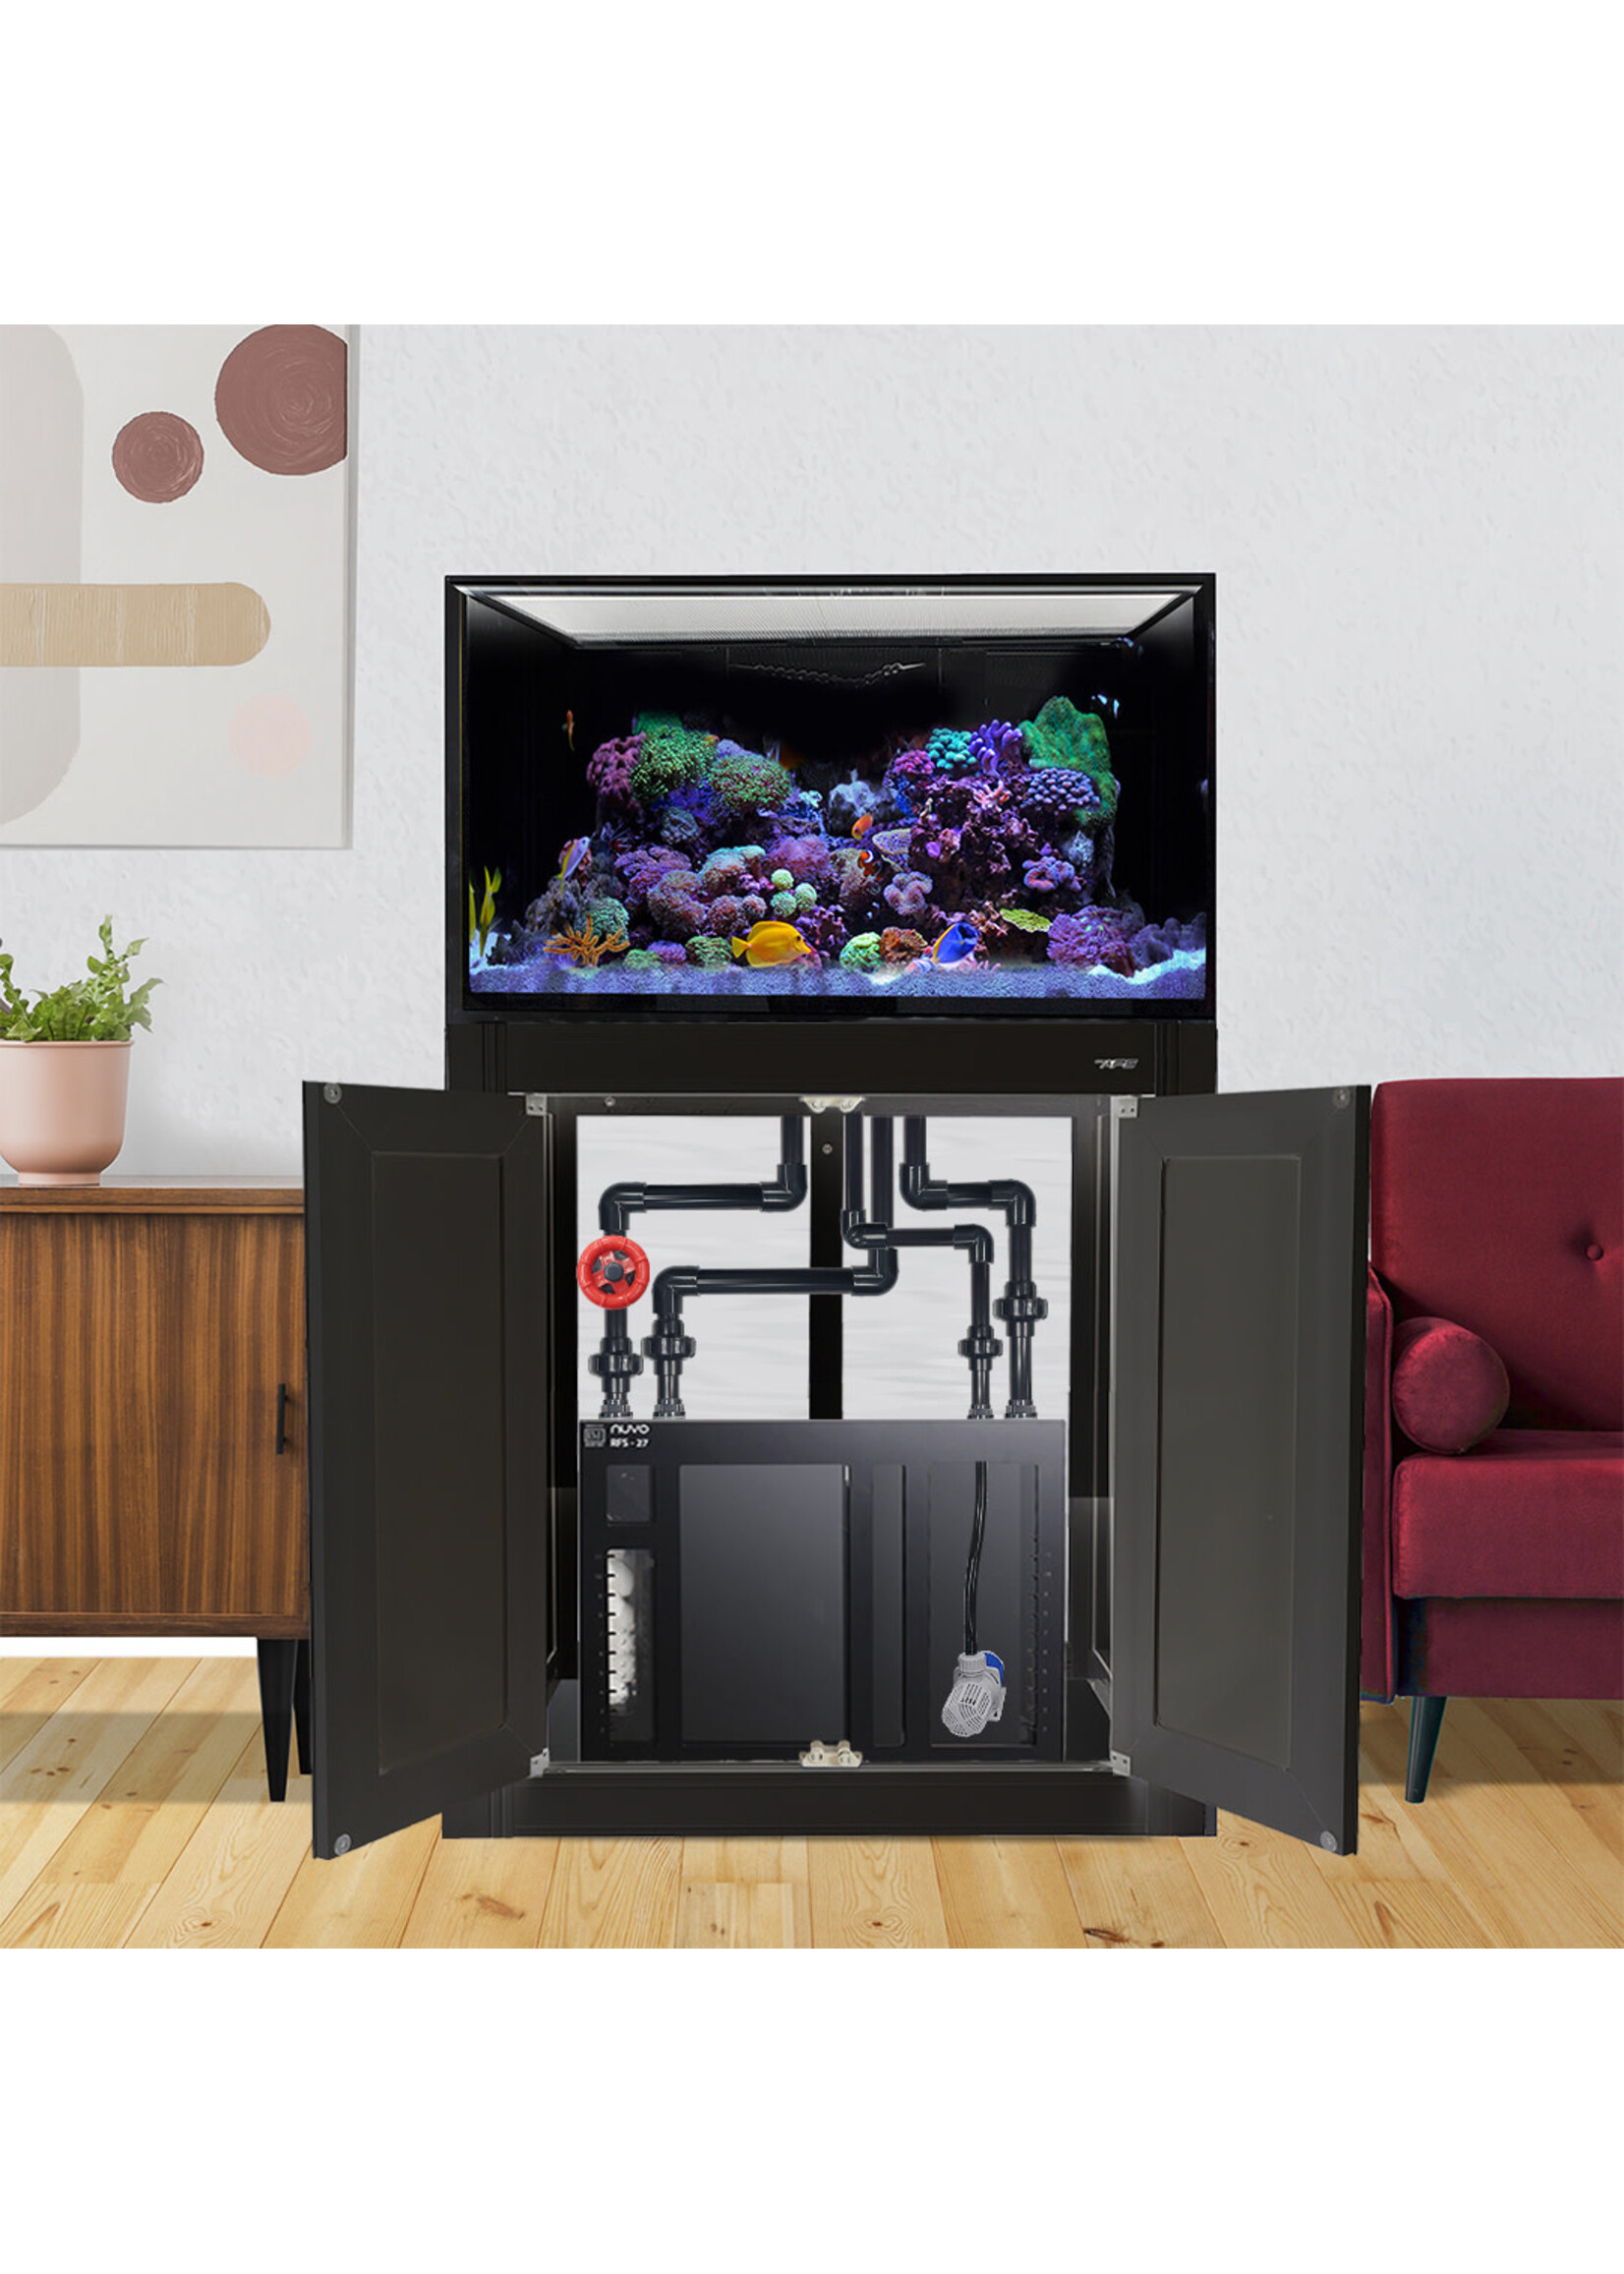 Innovative Marine INT 75 GALLON COMPLETE REEF SYSTEM RFS 27 SUMP MIGHTY XL PUMP PLUMBING KIT APS STAND BLACK